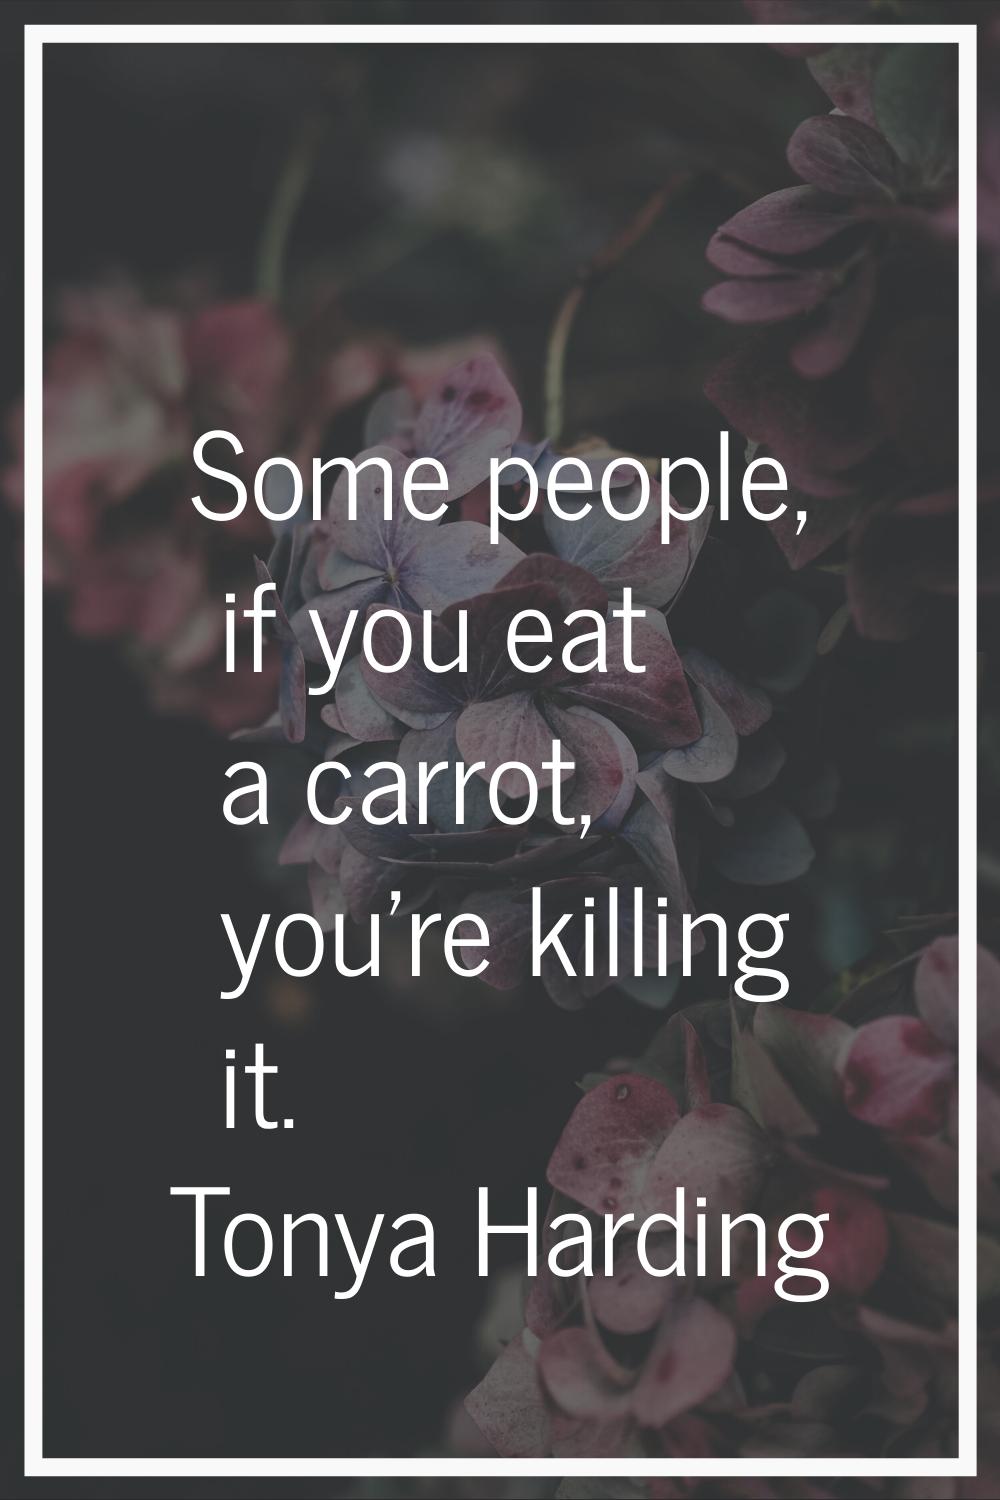 Some people, if you eat a carrot, you're killing it.